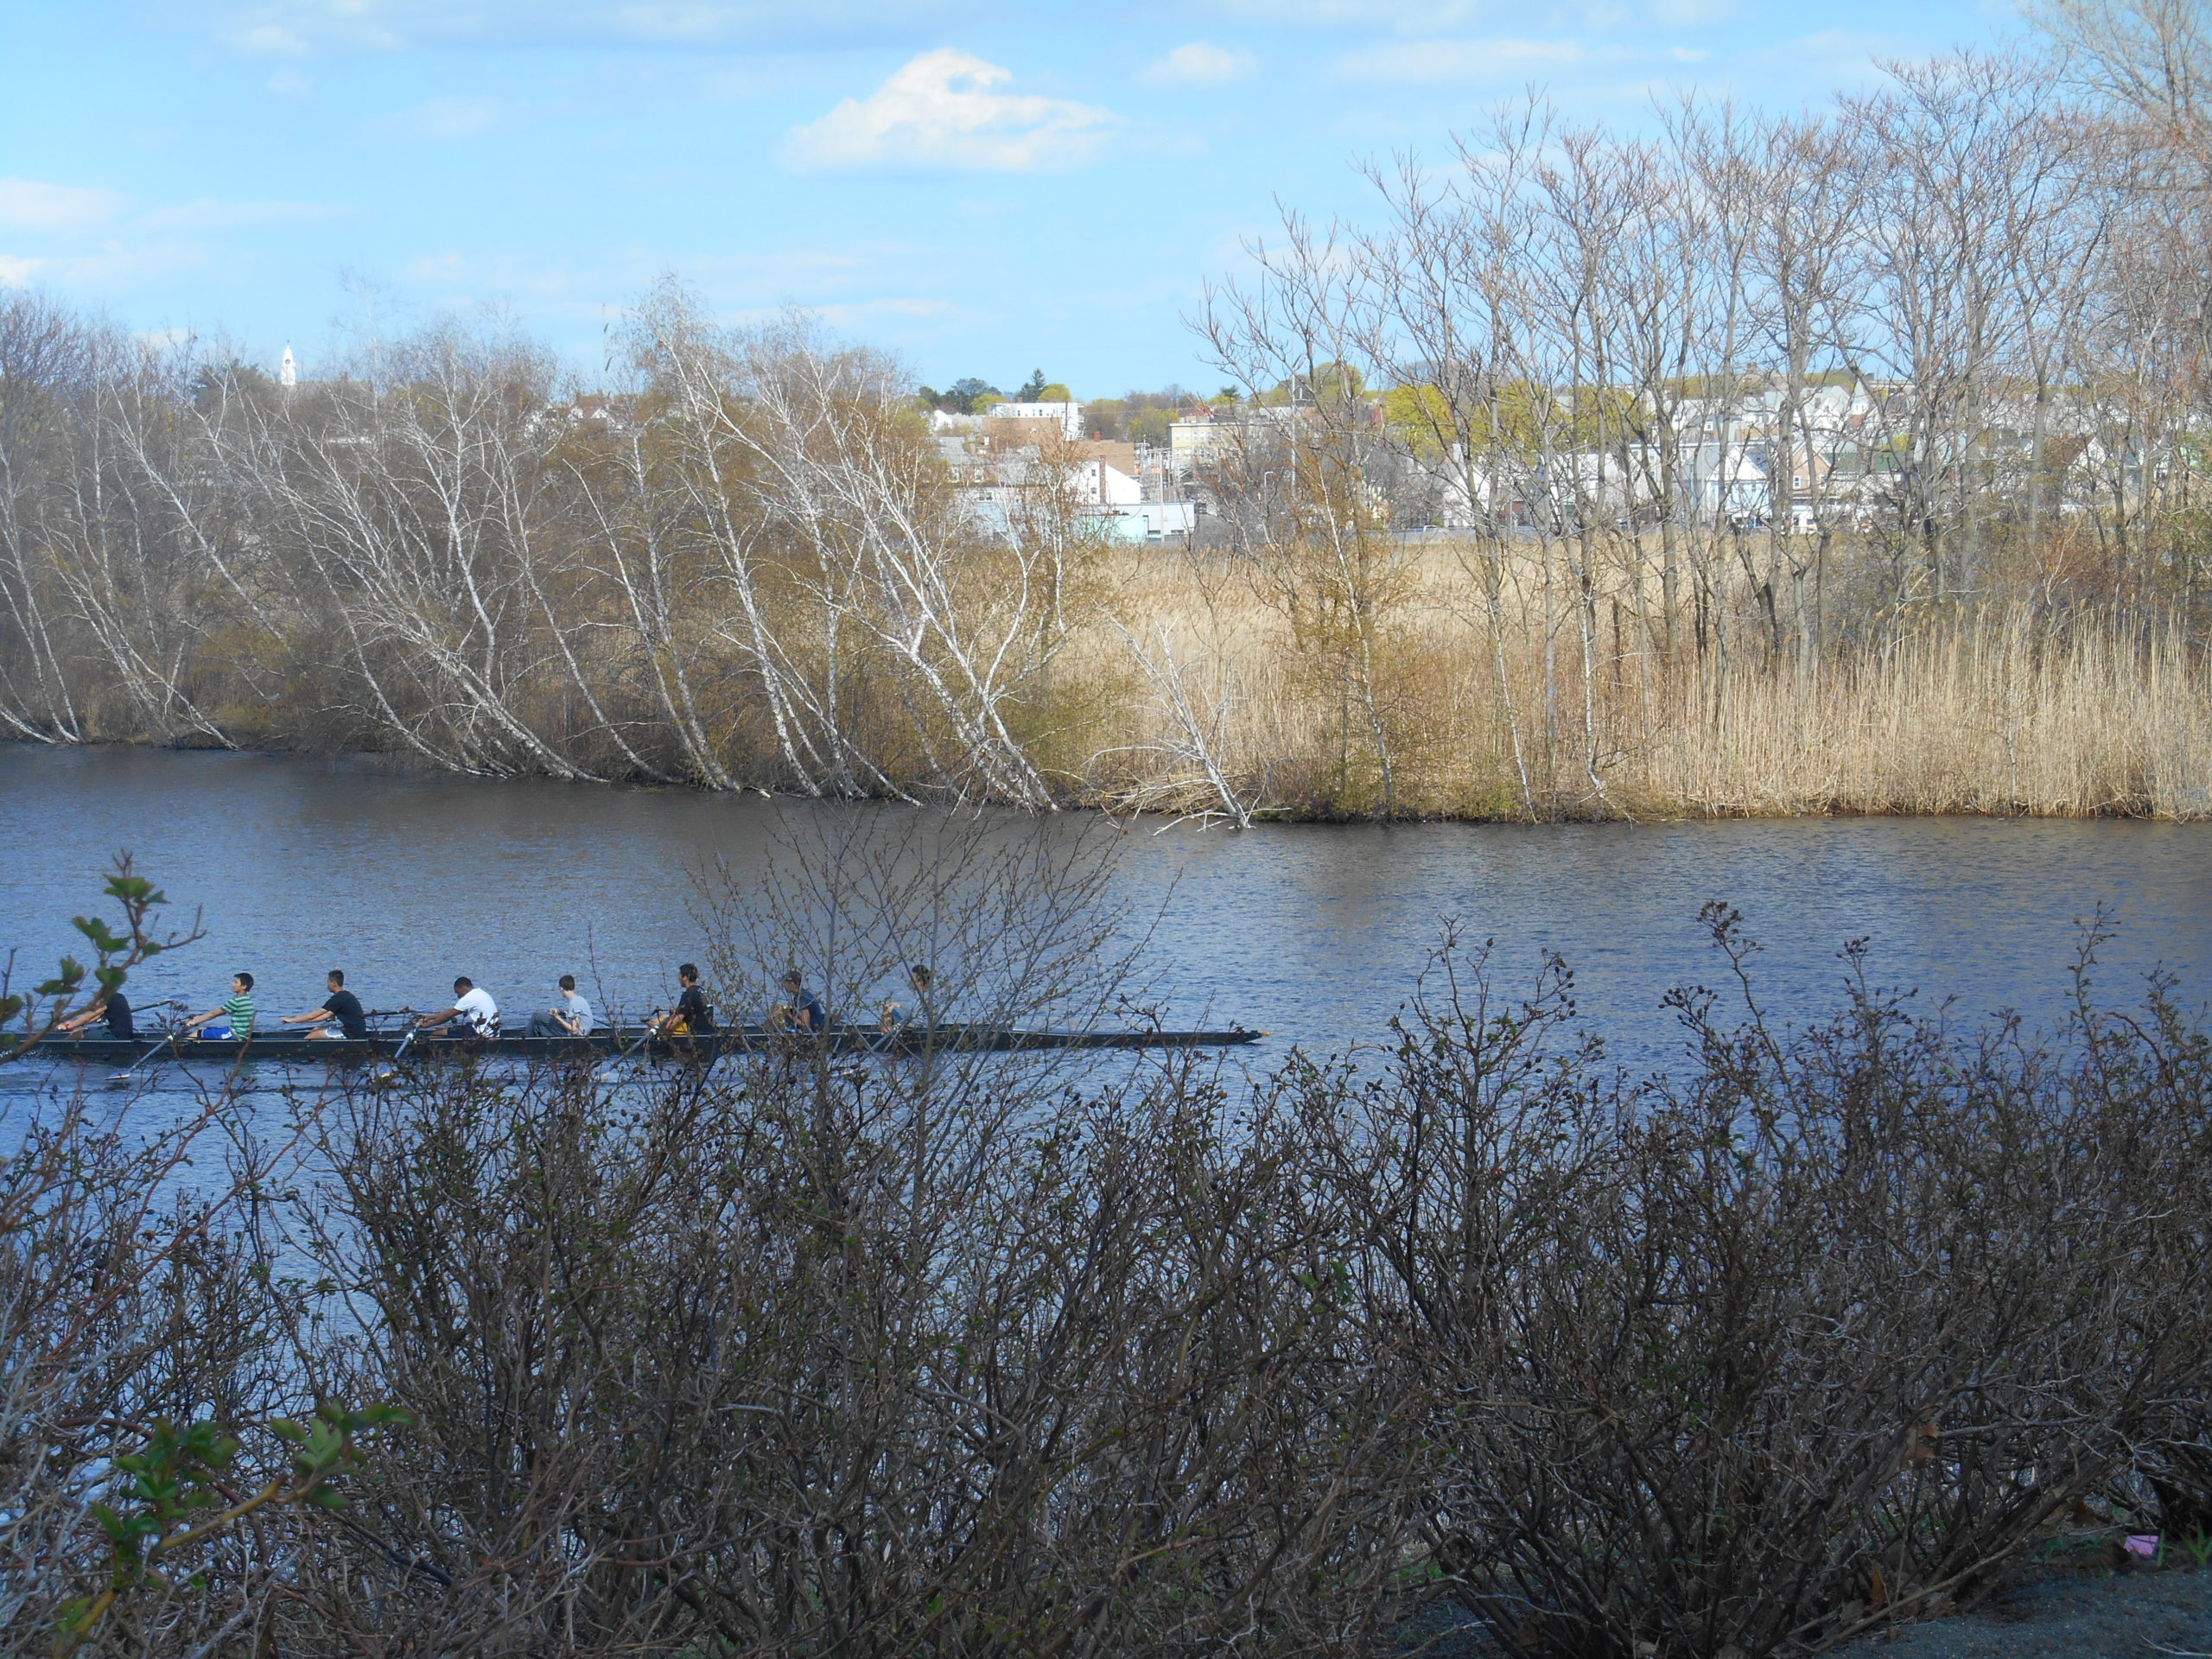 Image of rowers on the Malden River